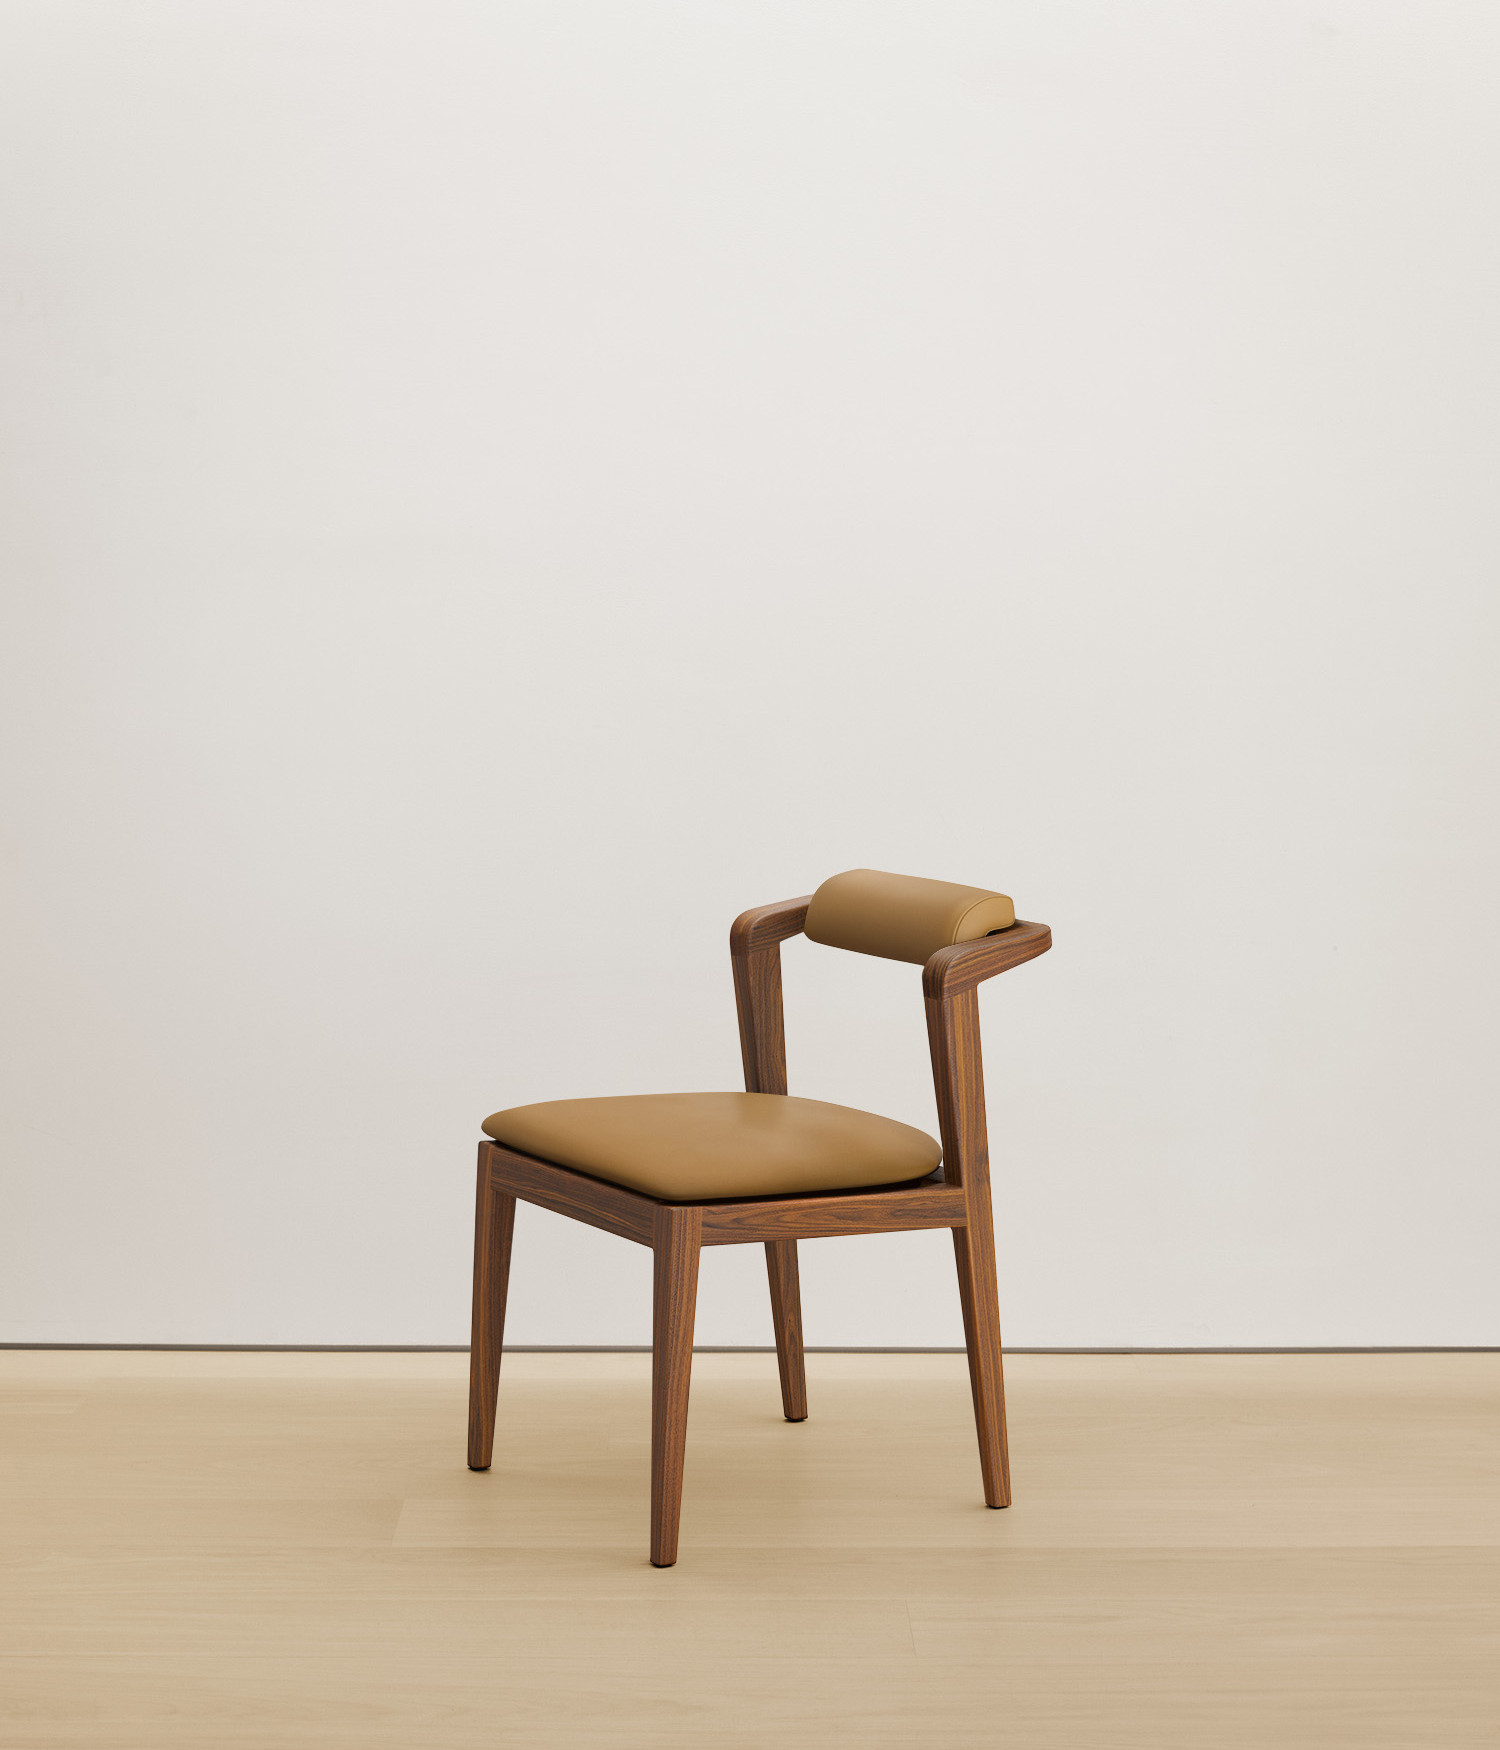  walnut chair with tan color upholstered seat 